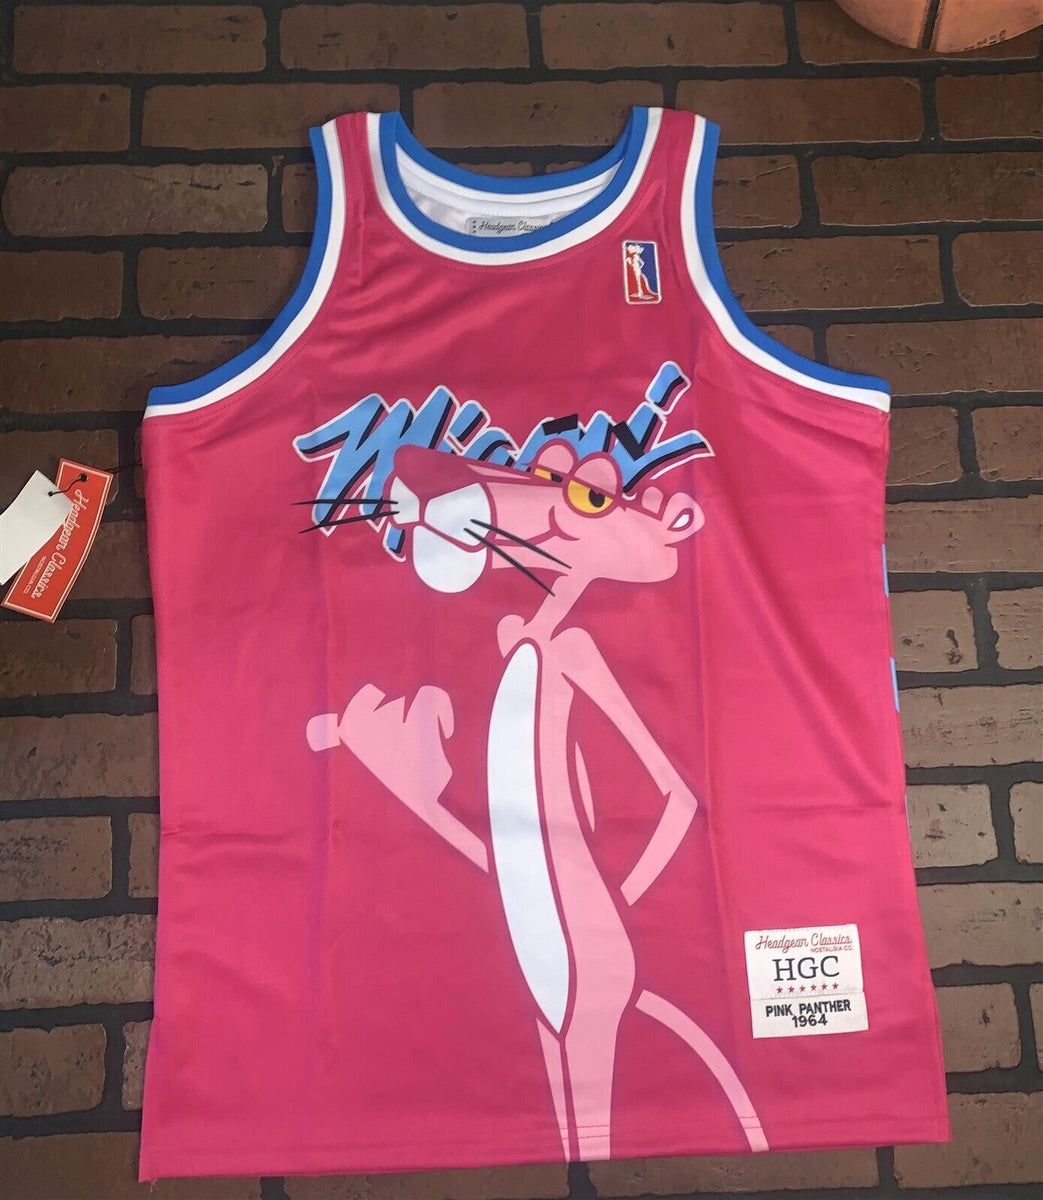 PINK PANTHER / MIAMI RED Headgear Classics Basketball Jersey